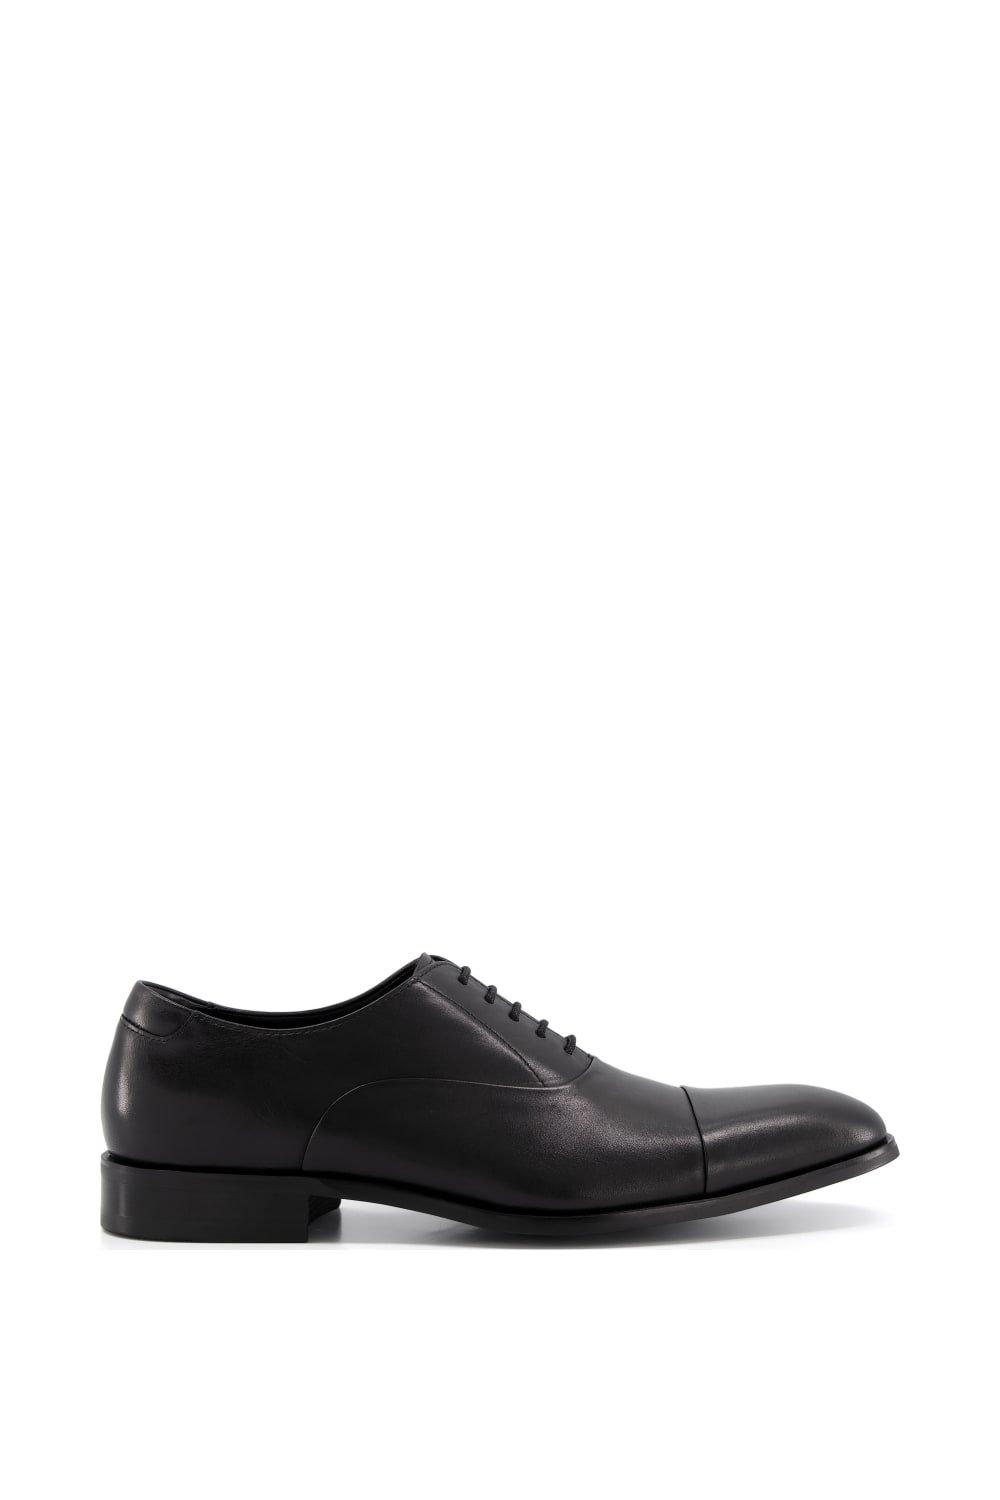 Shoes | 'Secrecy' Leather Oxfords | Dune London